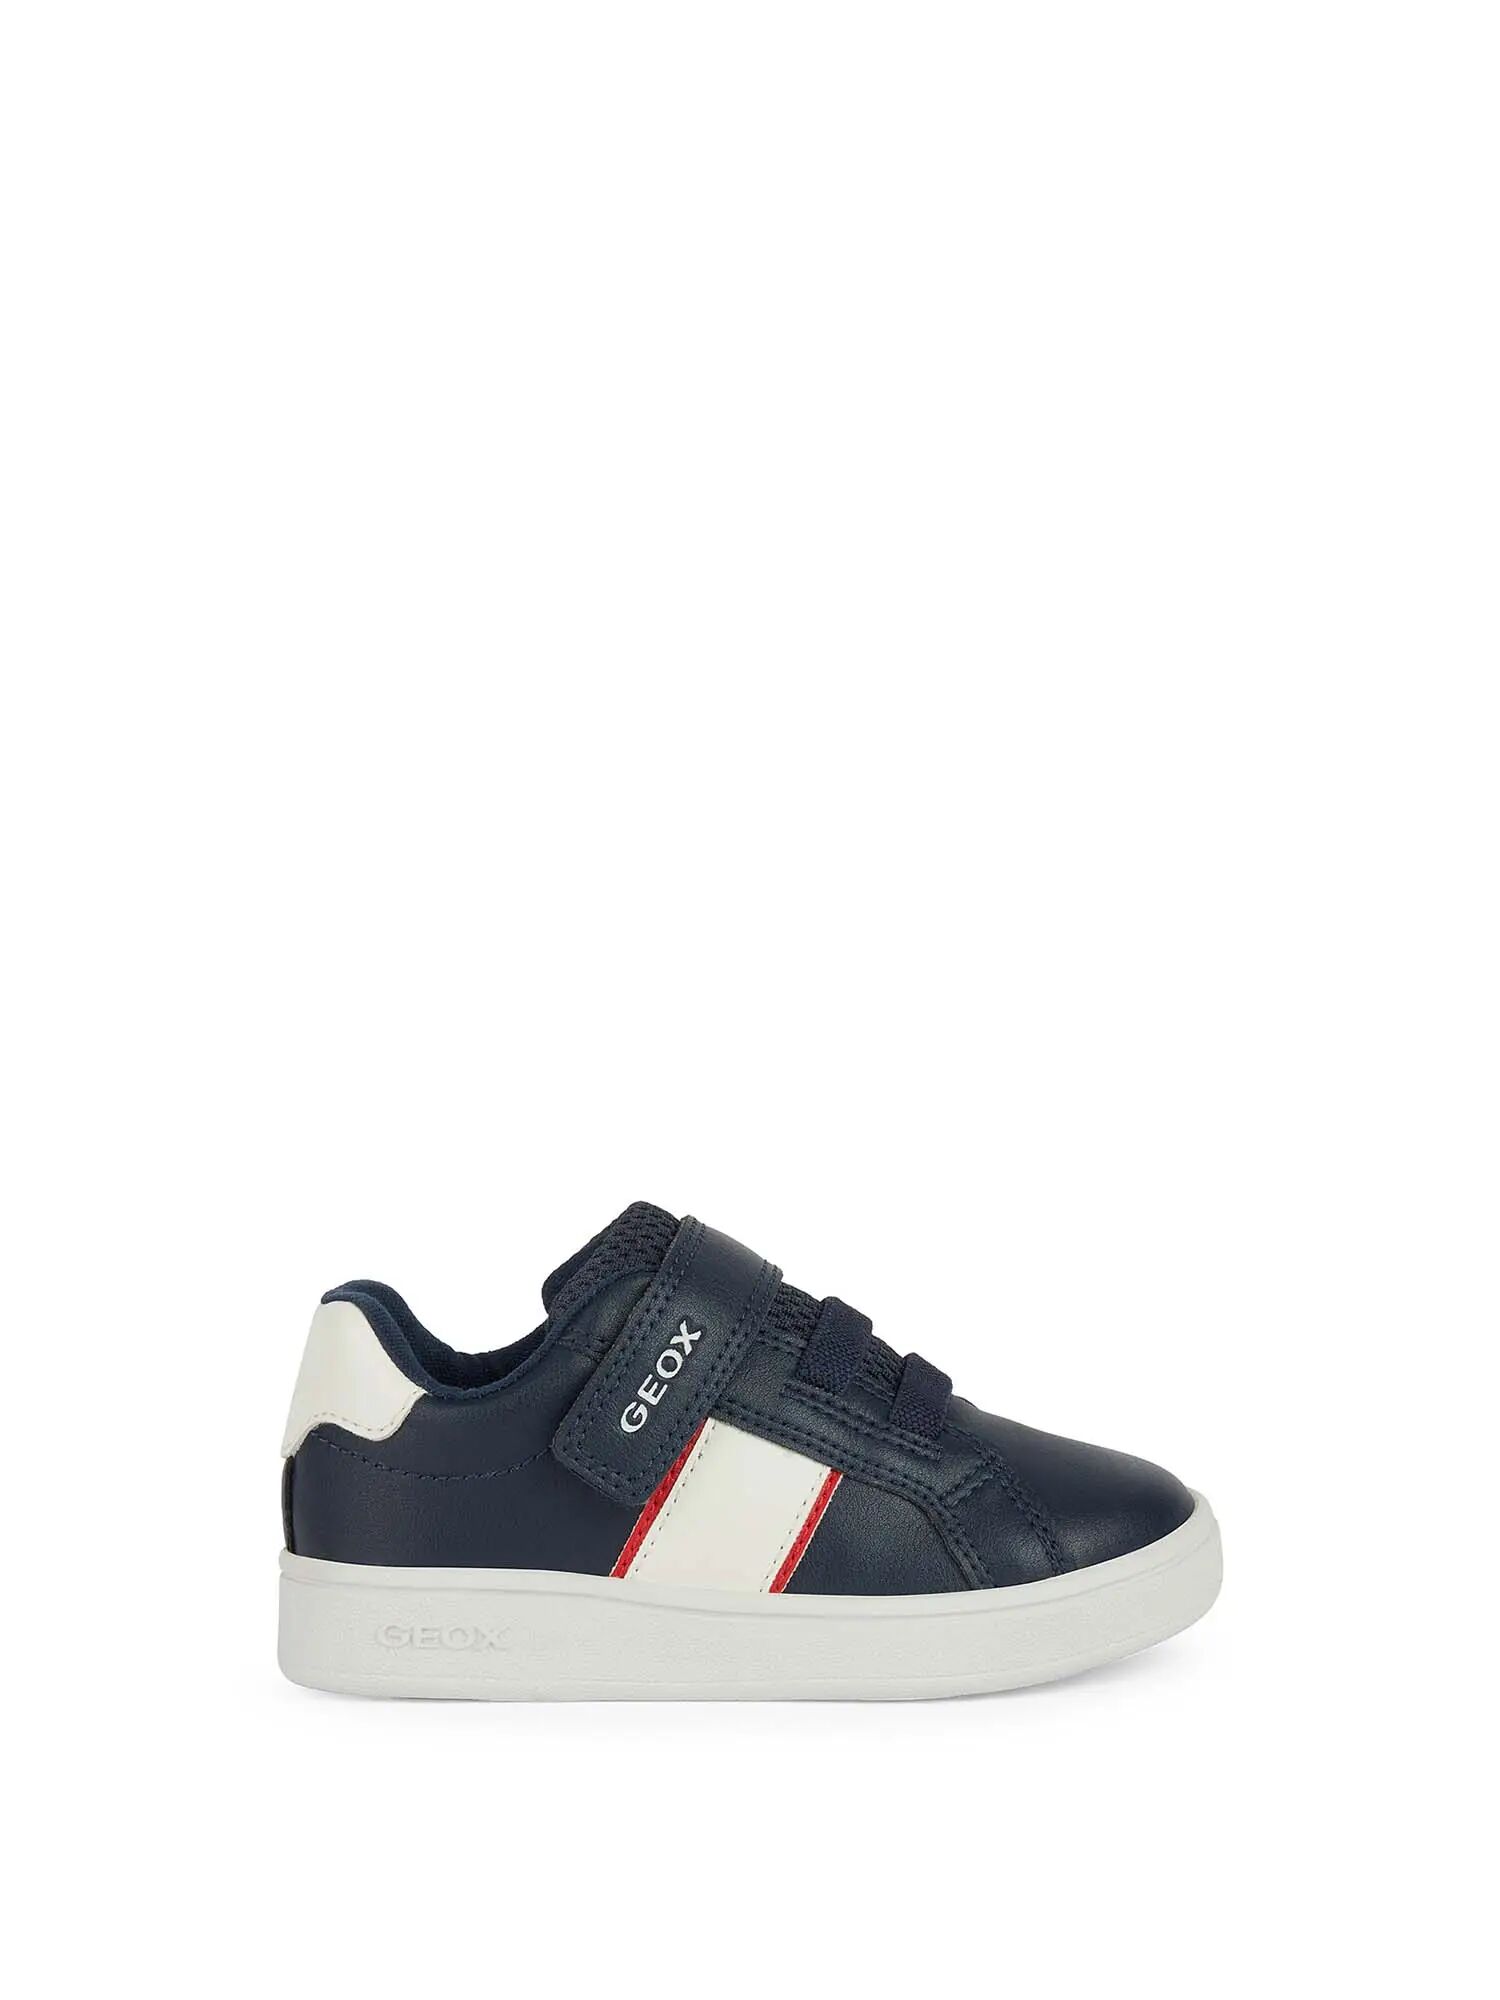 Geox Sneakers Bambino Colore Navy/rosso NAVY/ROSSO 20